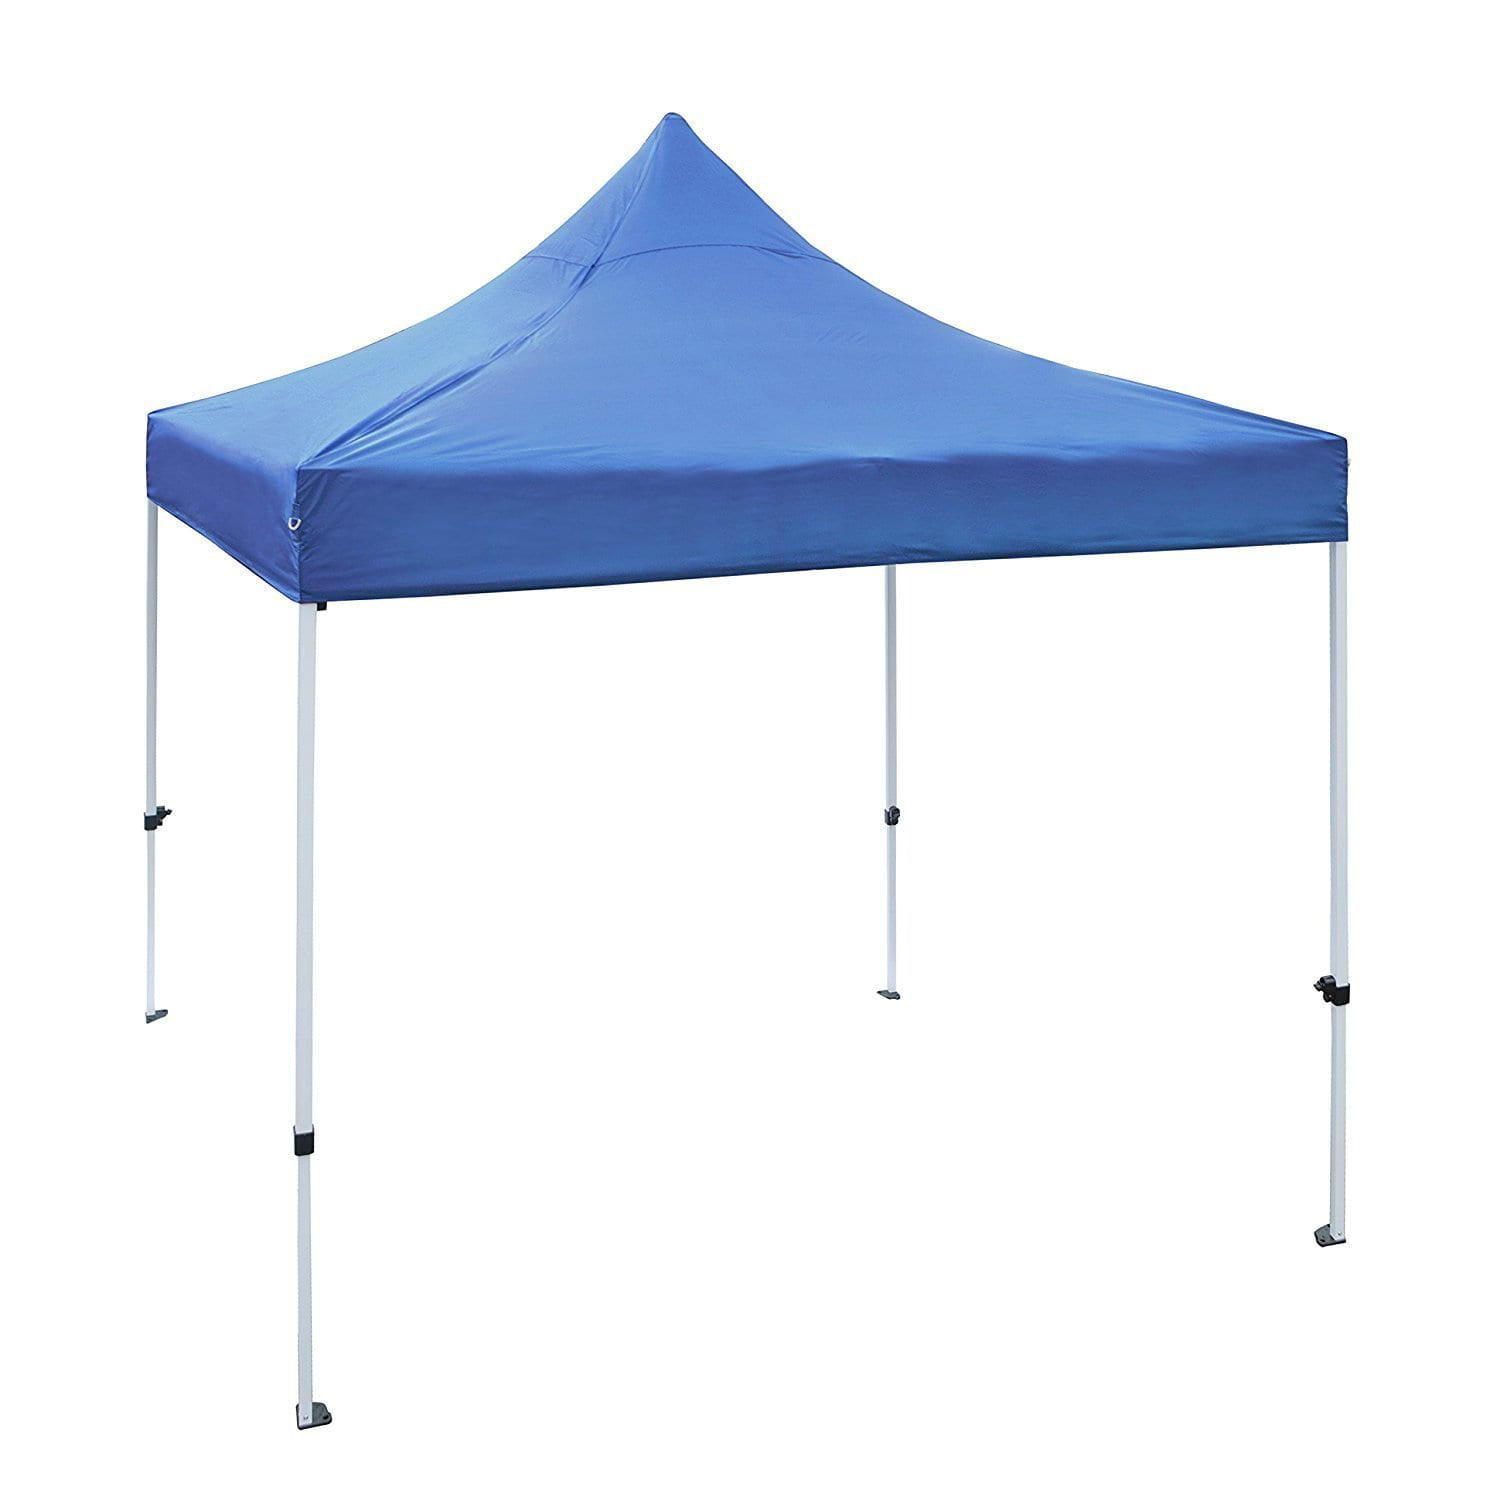 Blue color ALEKO Easy Pop Up Outdoor Collapsible 10' x 10' Gazebo Canopy Tent 